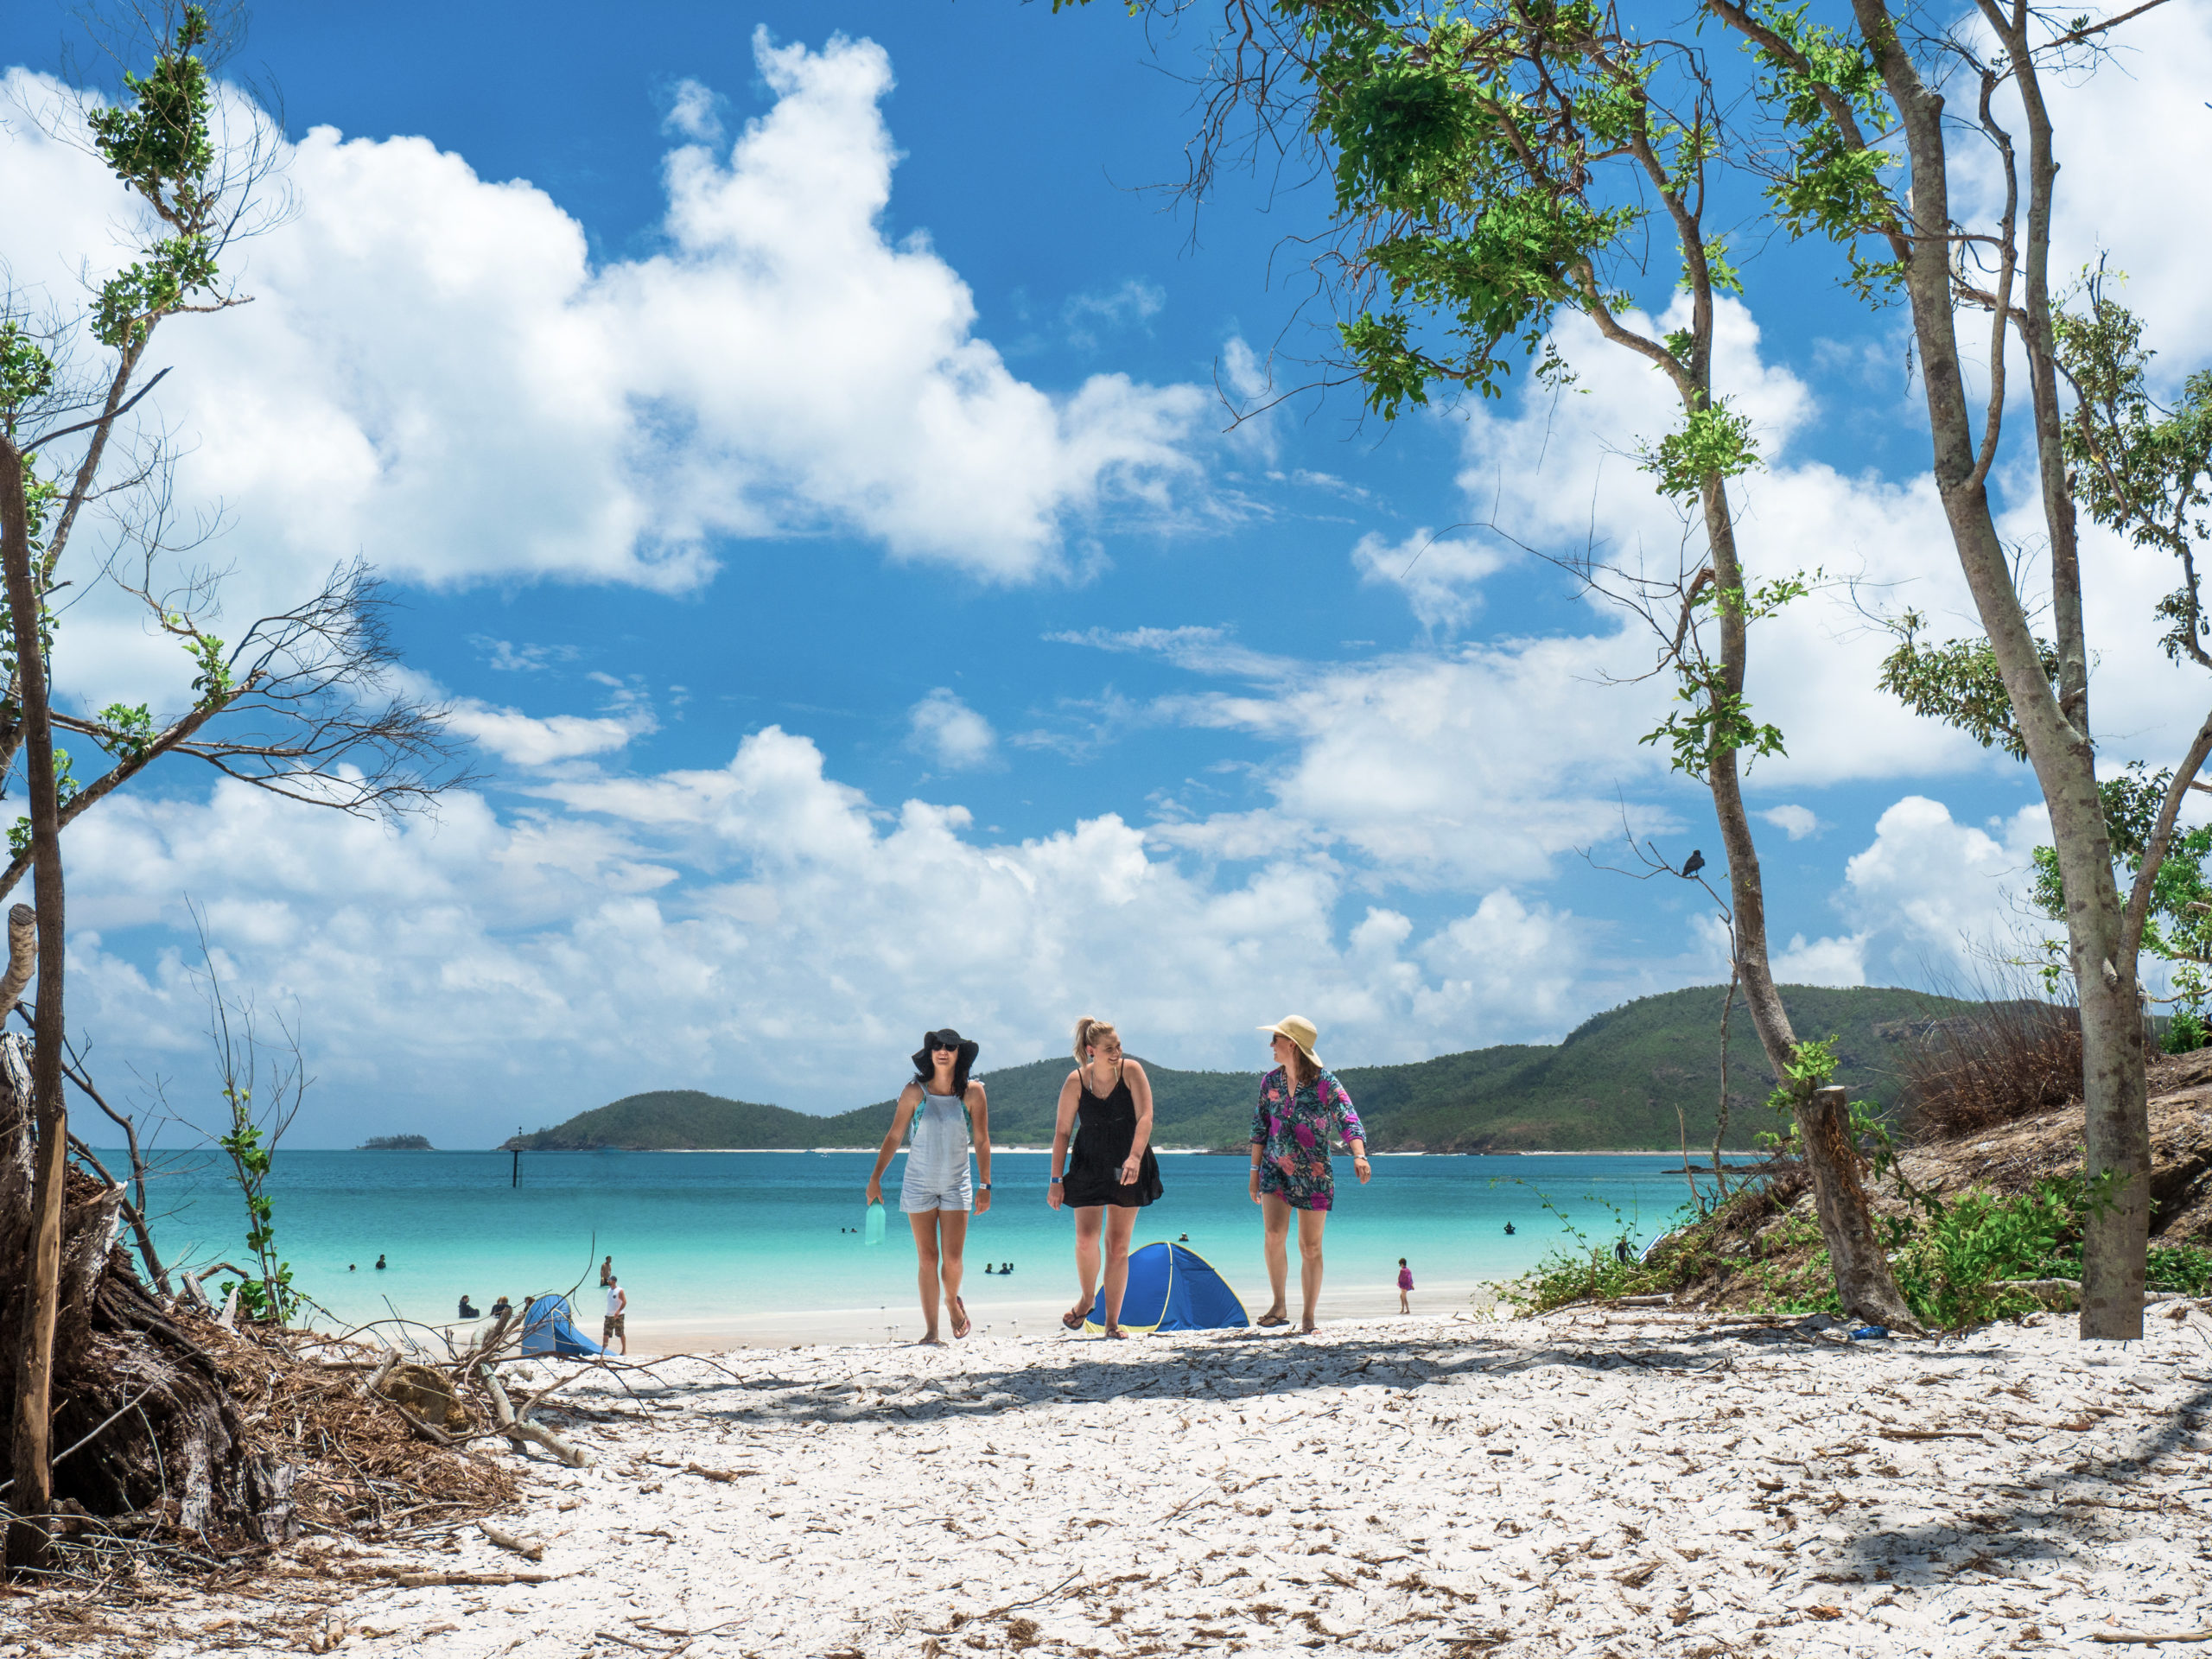 queensland places to visit